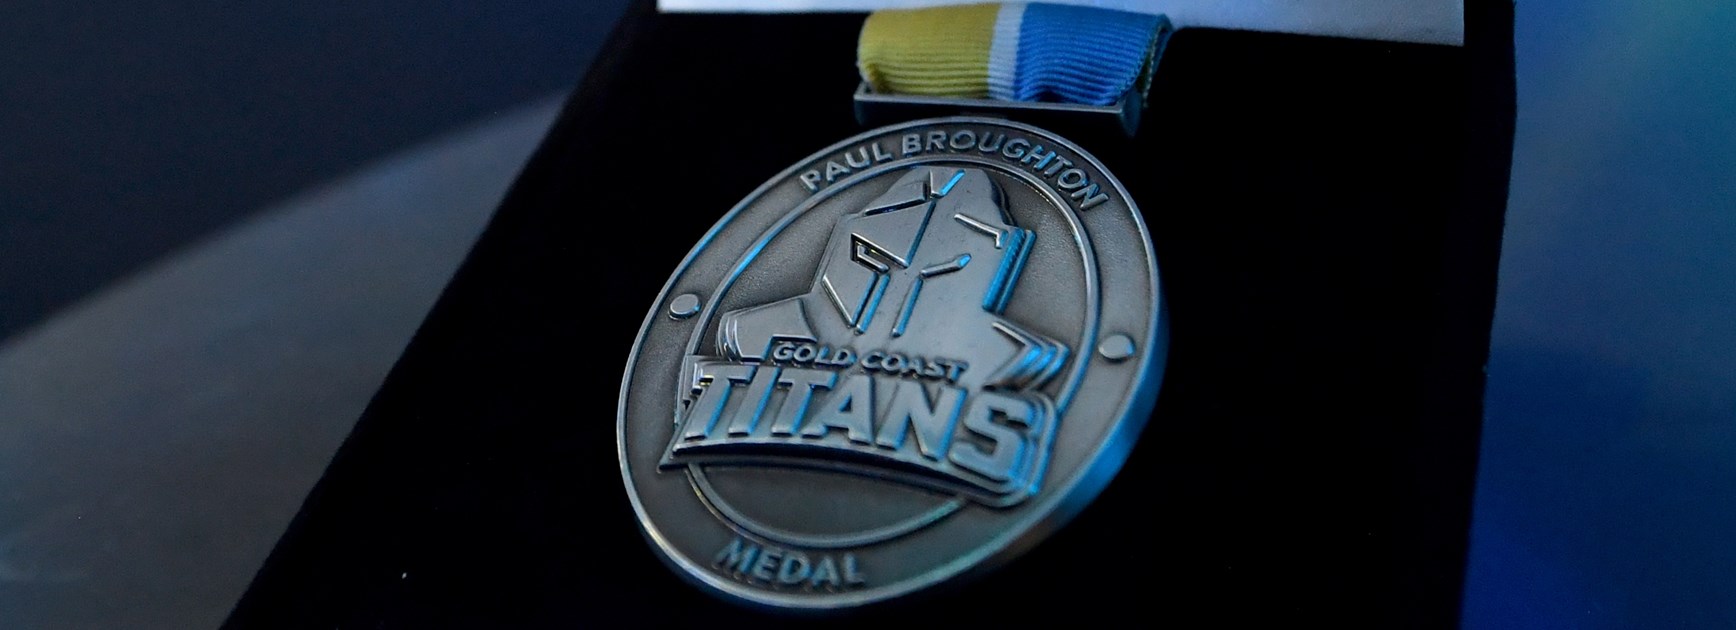 Fan vote: Who wins the 2023 Paul Broughton Medal?